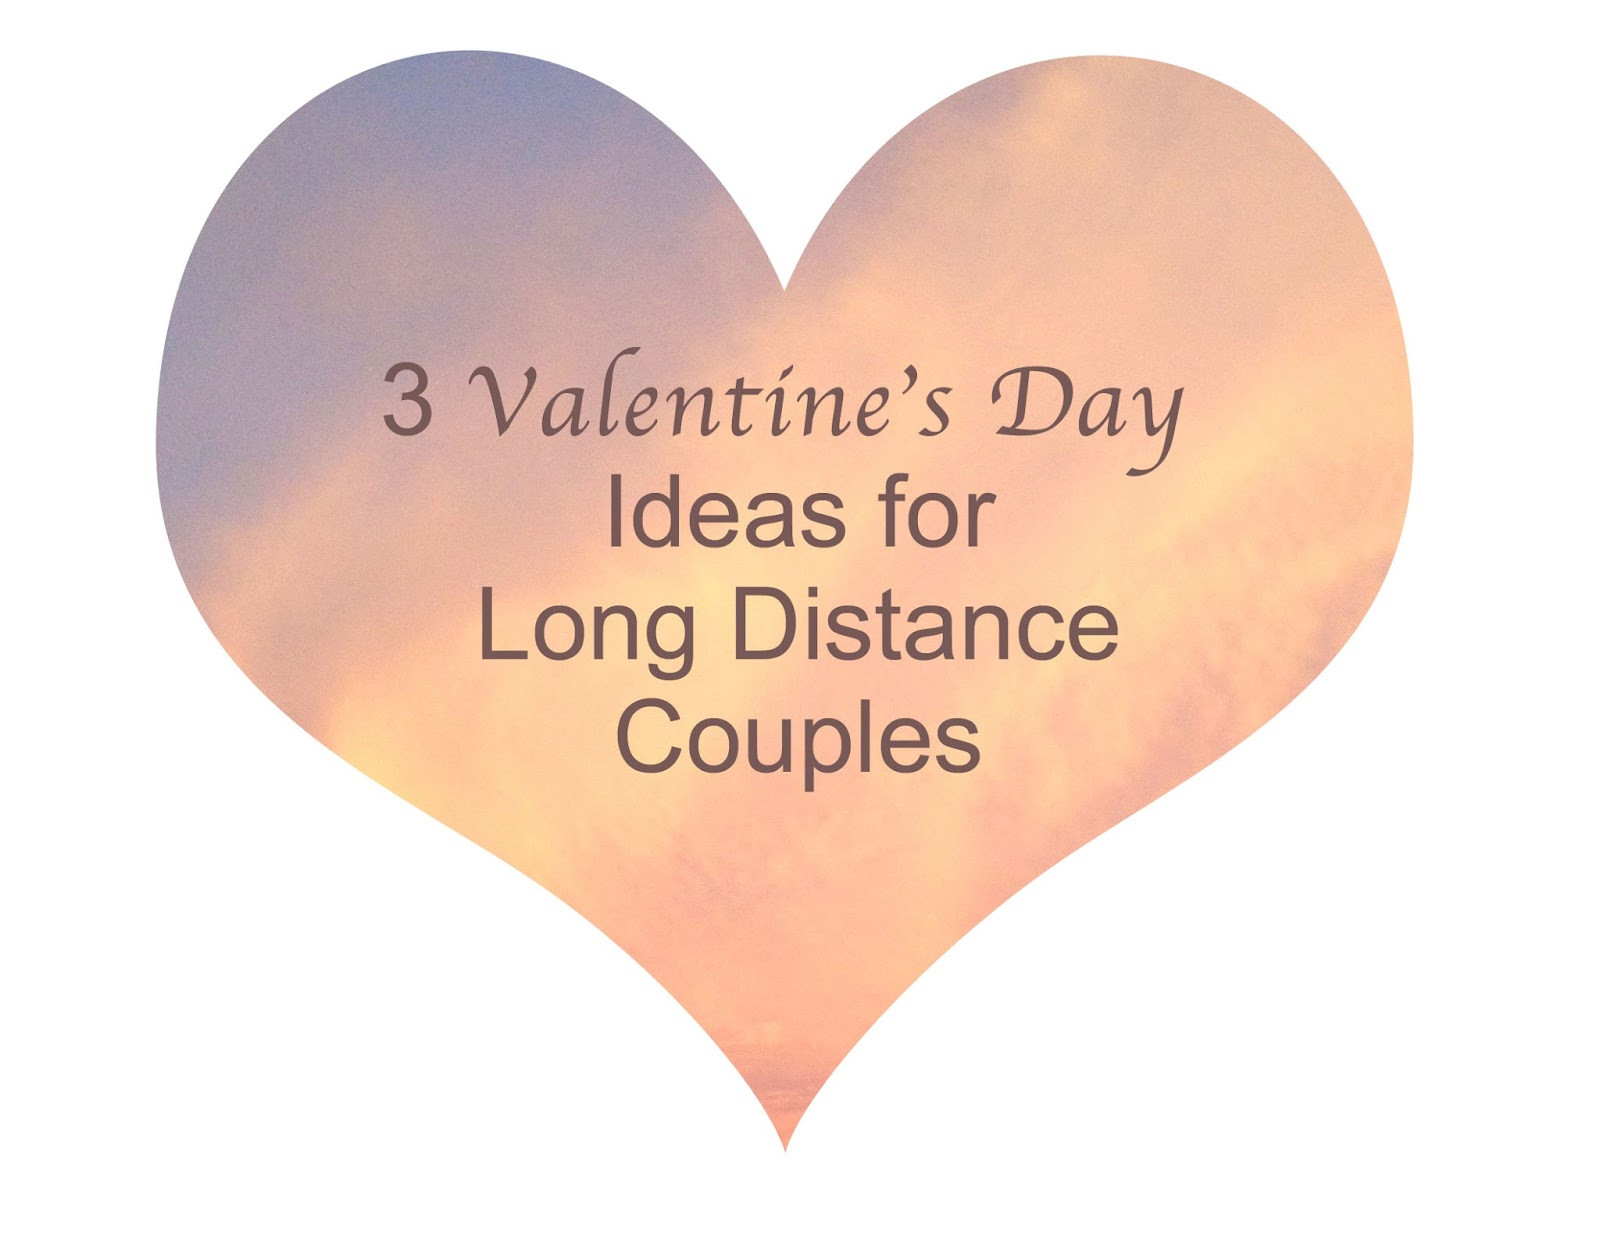 Long Distance Relationship Valentines Day Ideas
 Meet Me In Midtown 3 Valentine s Day Ideas for Long